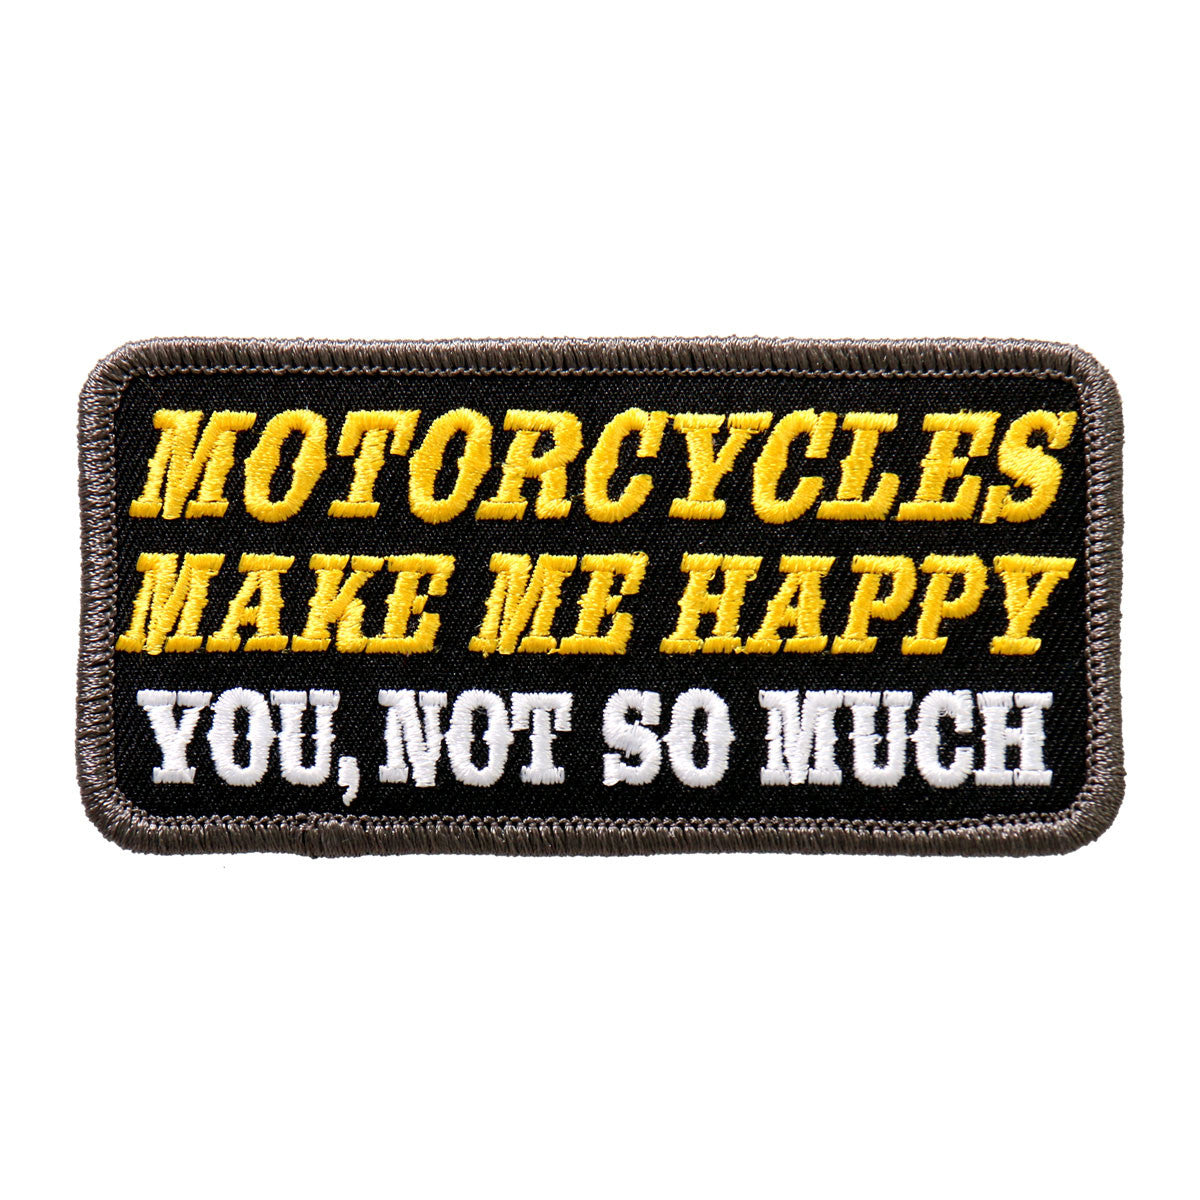 Motorcycles Make Me Happy - Maine-Line Leather